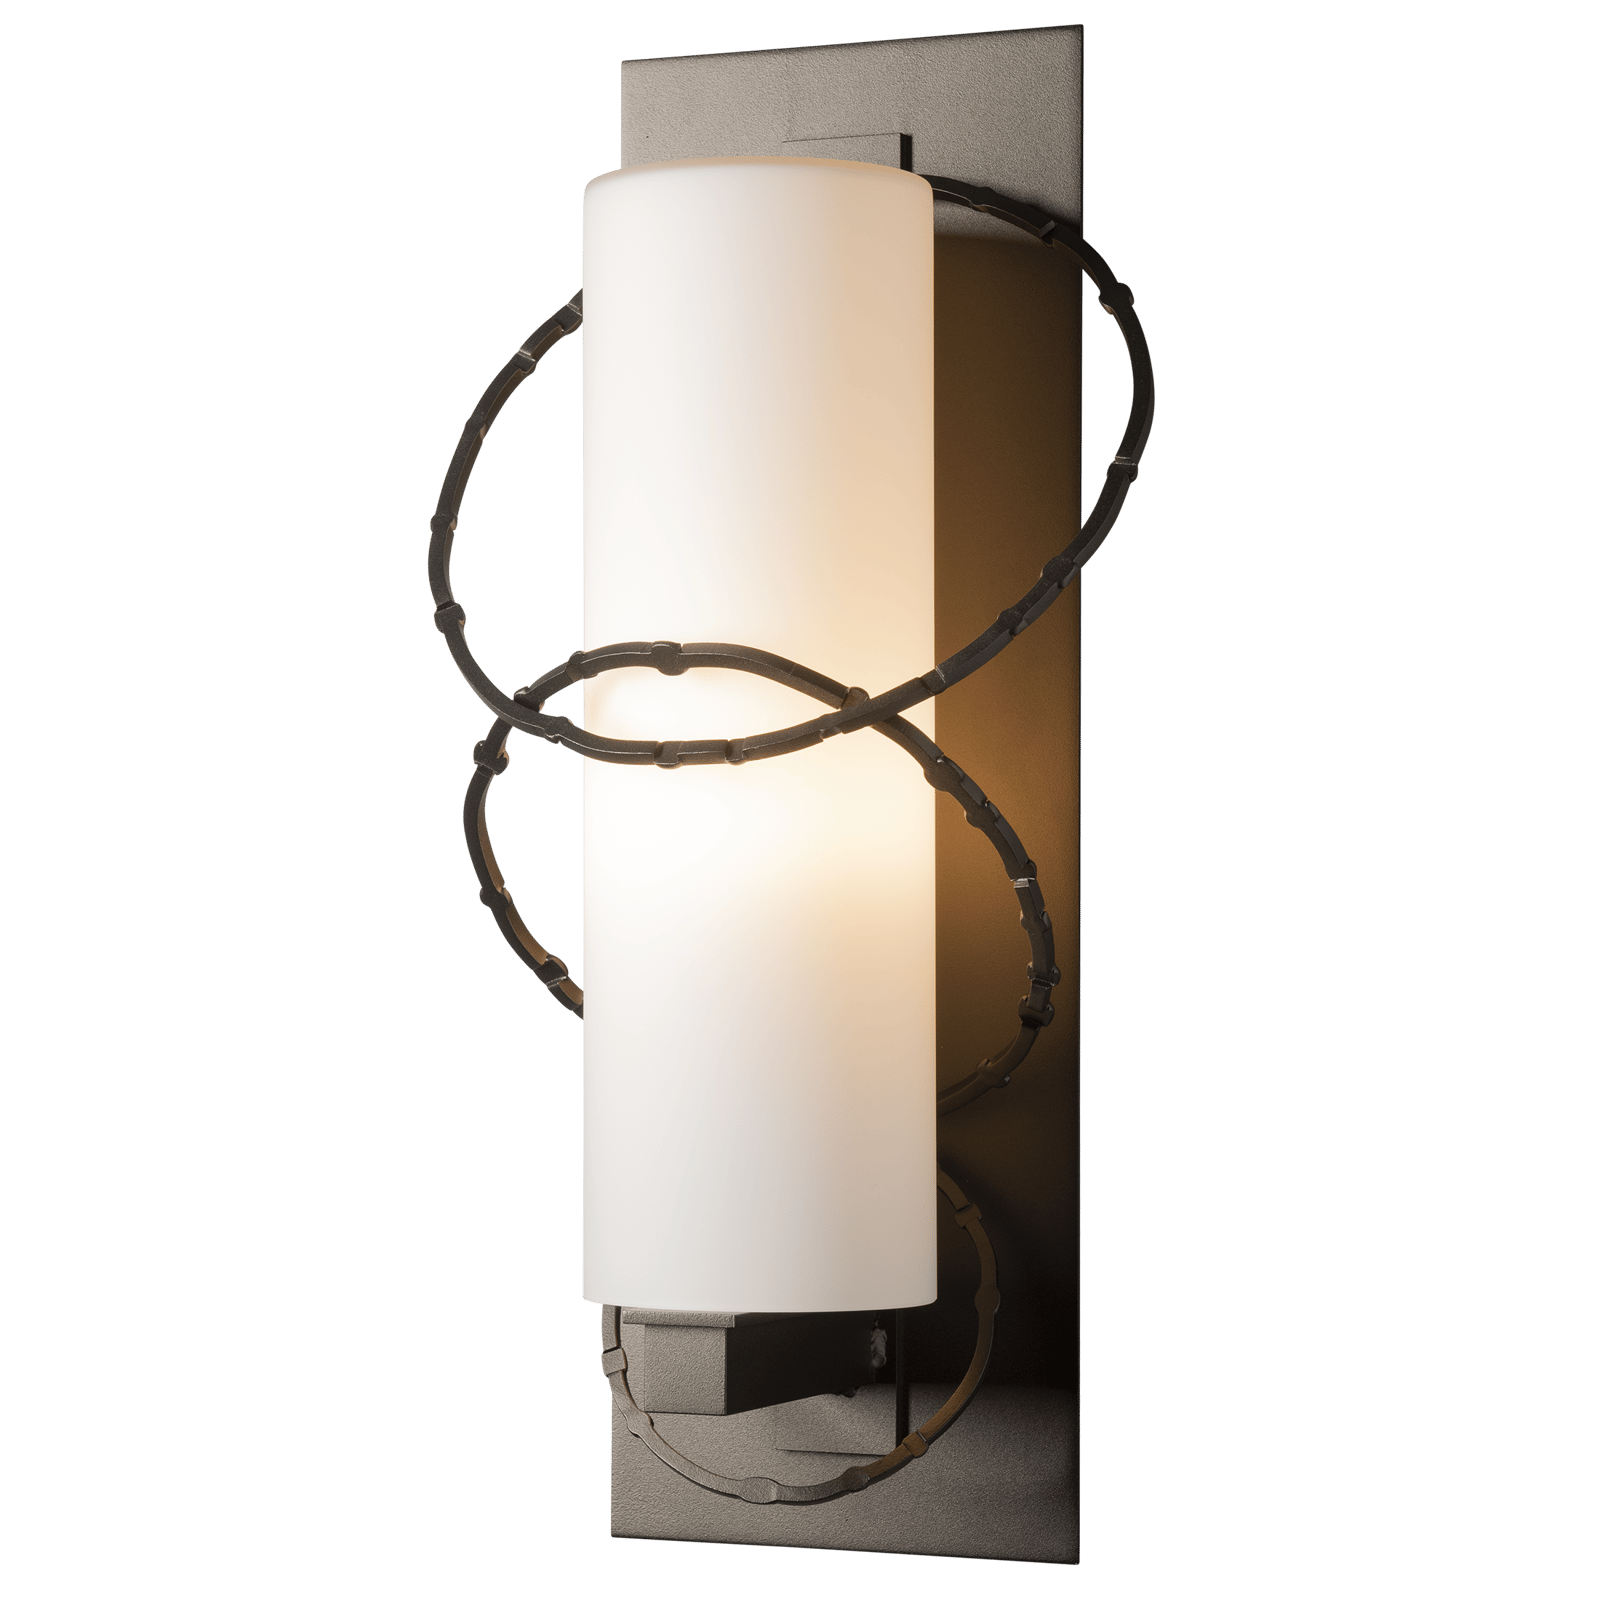 Hubbardton Forge Olympus Large Outdoor Sconce Outdoor l Wall Hubbardton Forge Coastal Oil Rubbed Bronze  